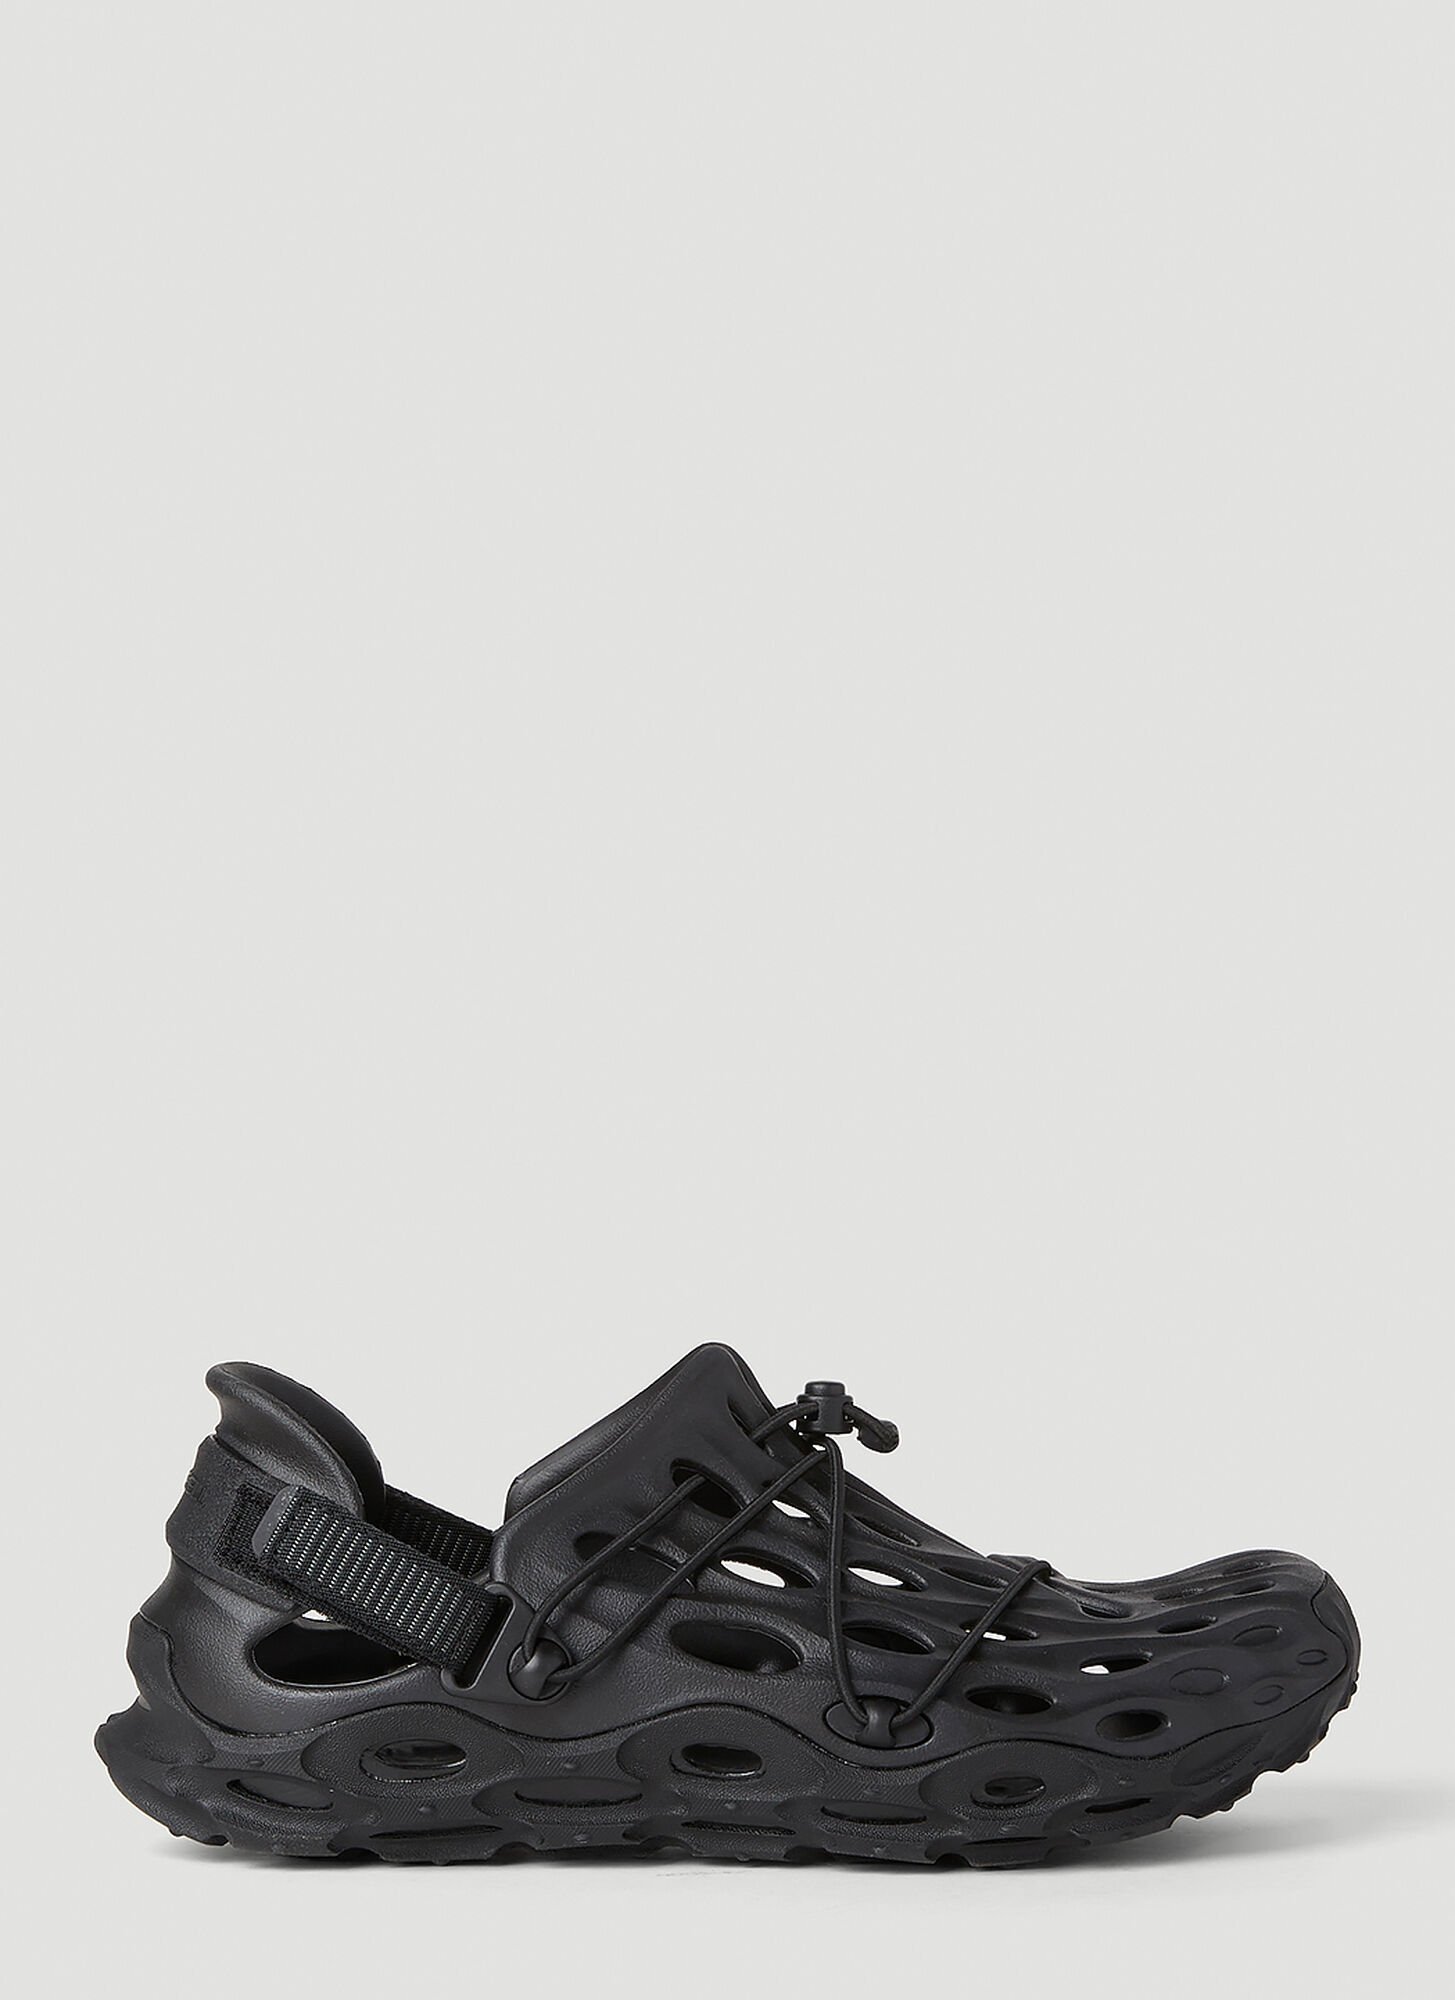 Merrell 1 Trl Hydro Moc At Cage Sneakers In Black